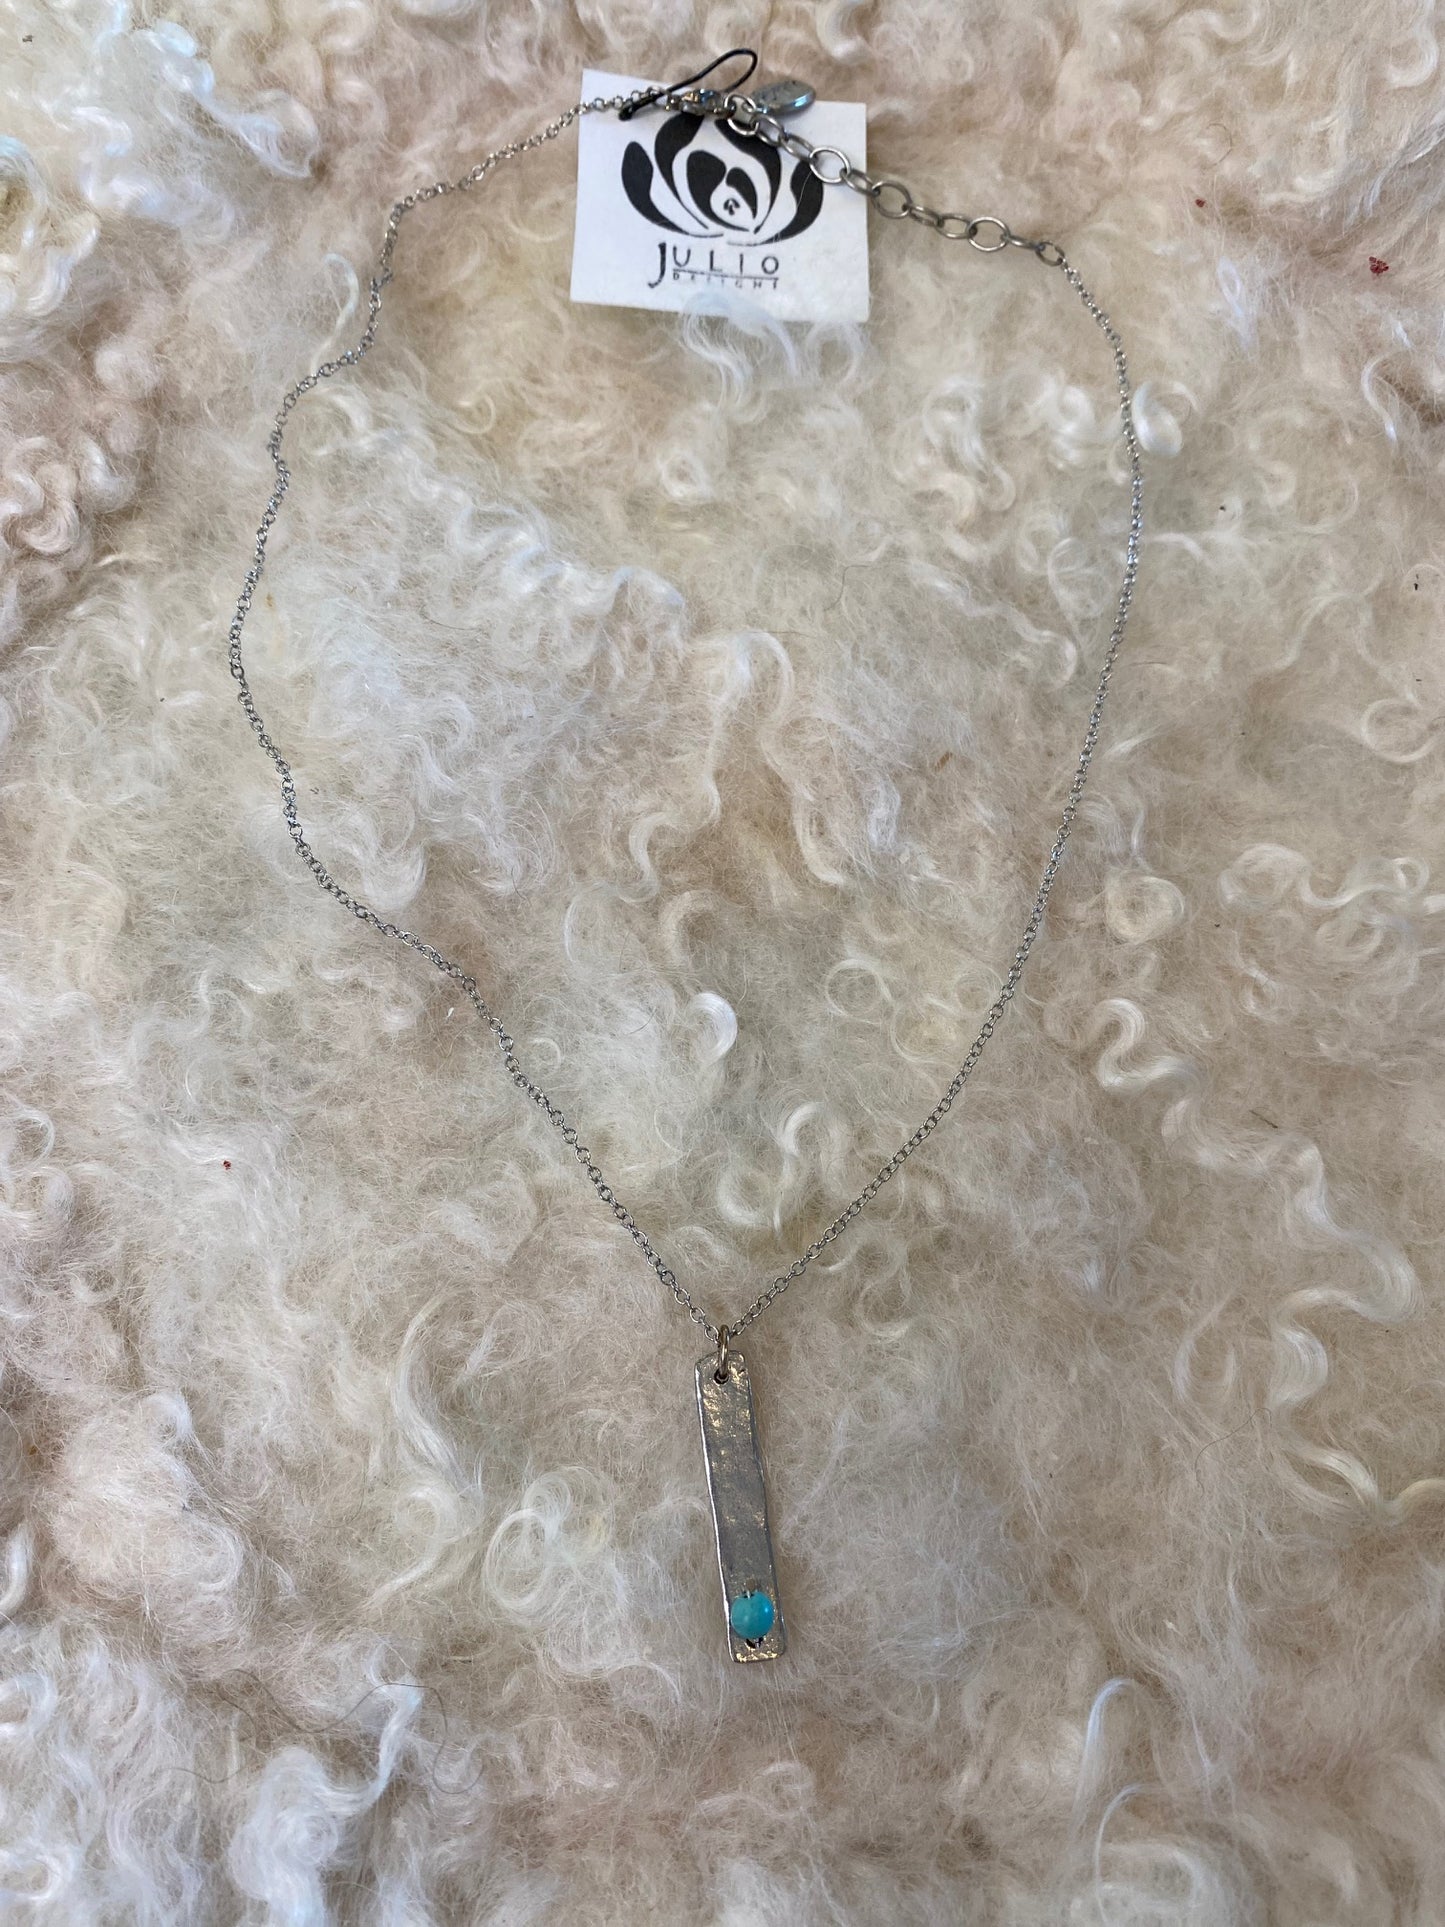 Julio Designs Last Chance 18" Necklace that are one of a kind- Hand Made